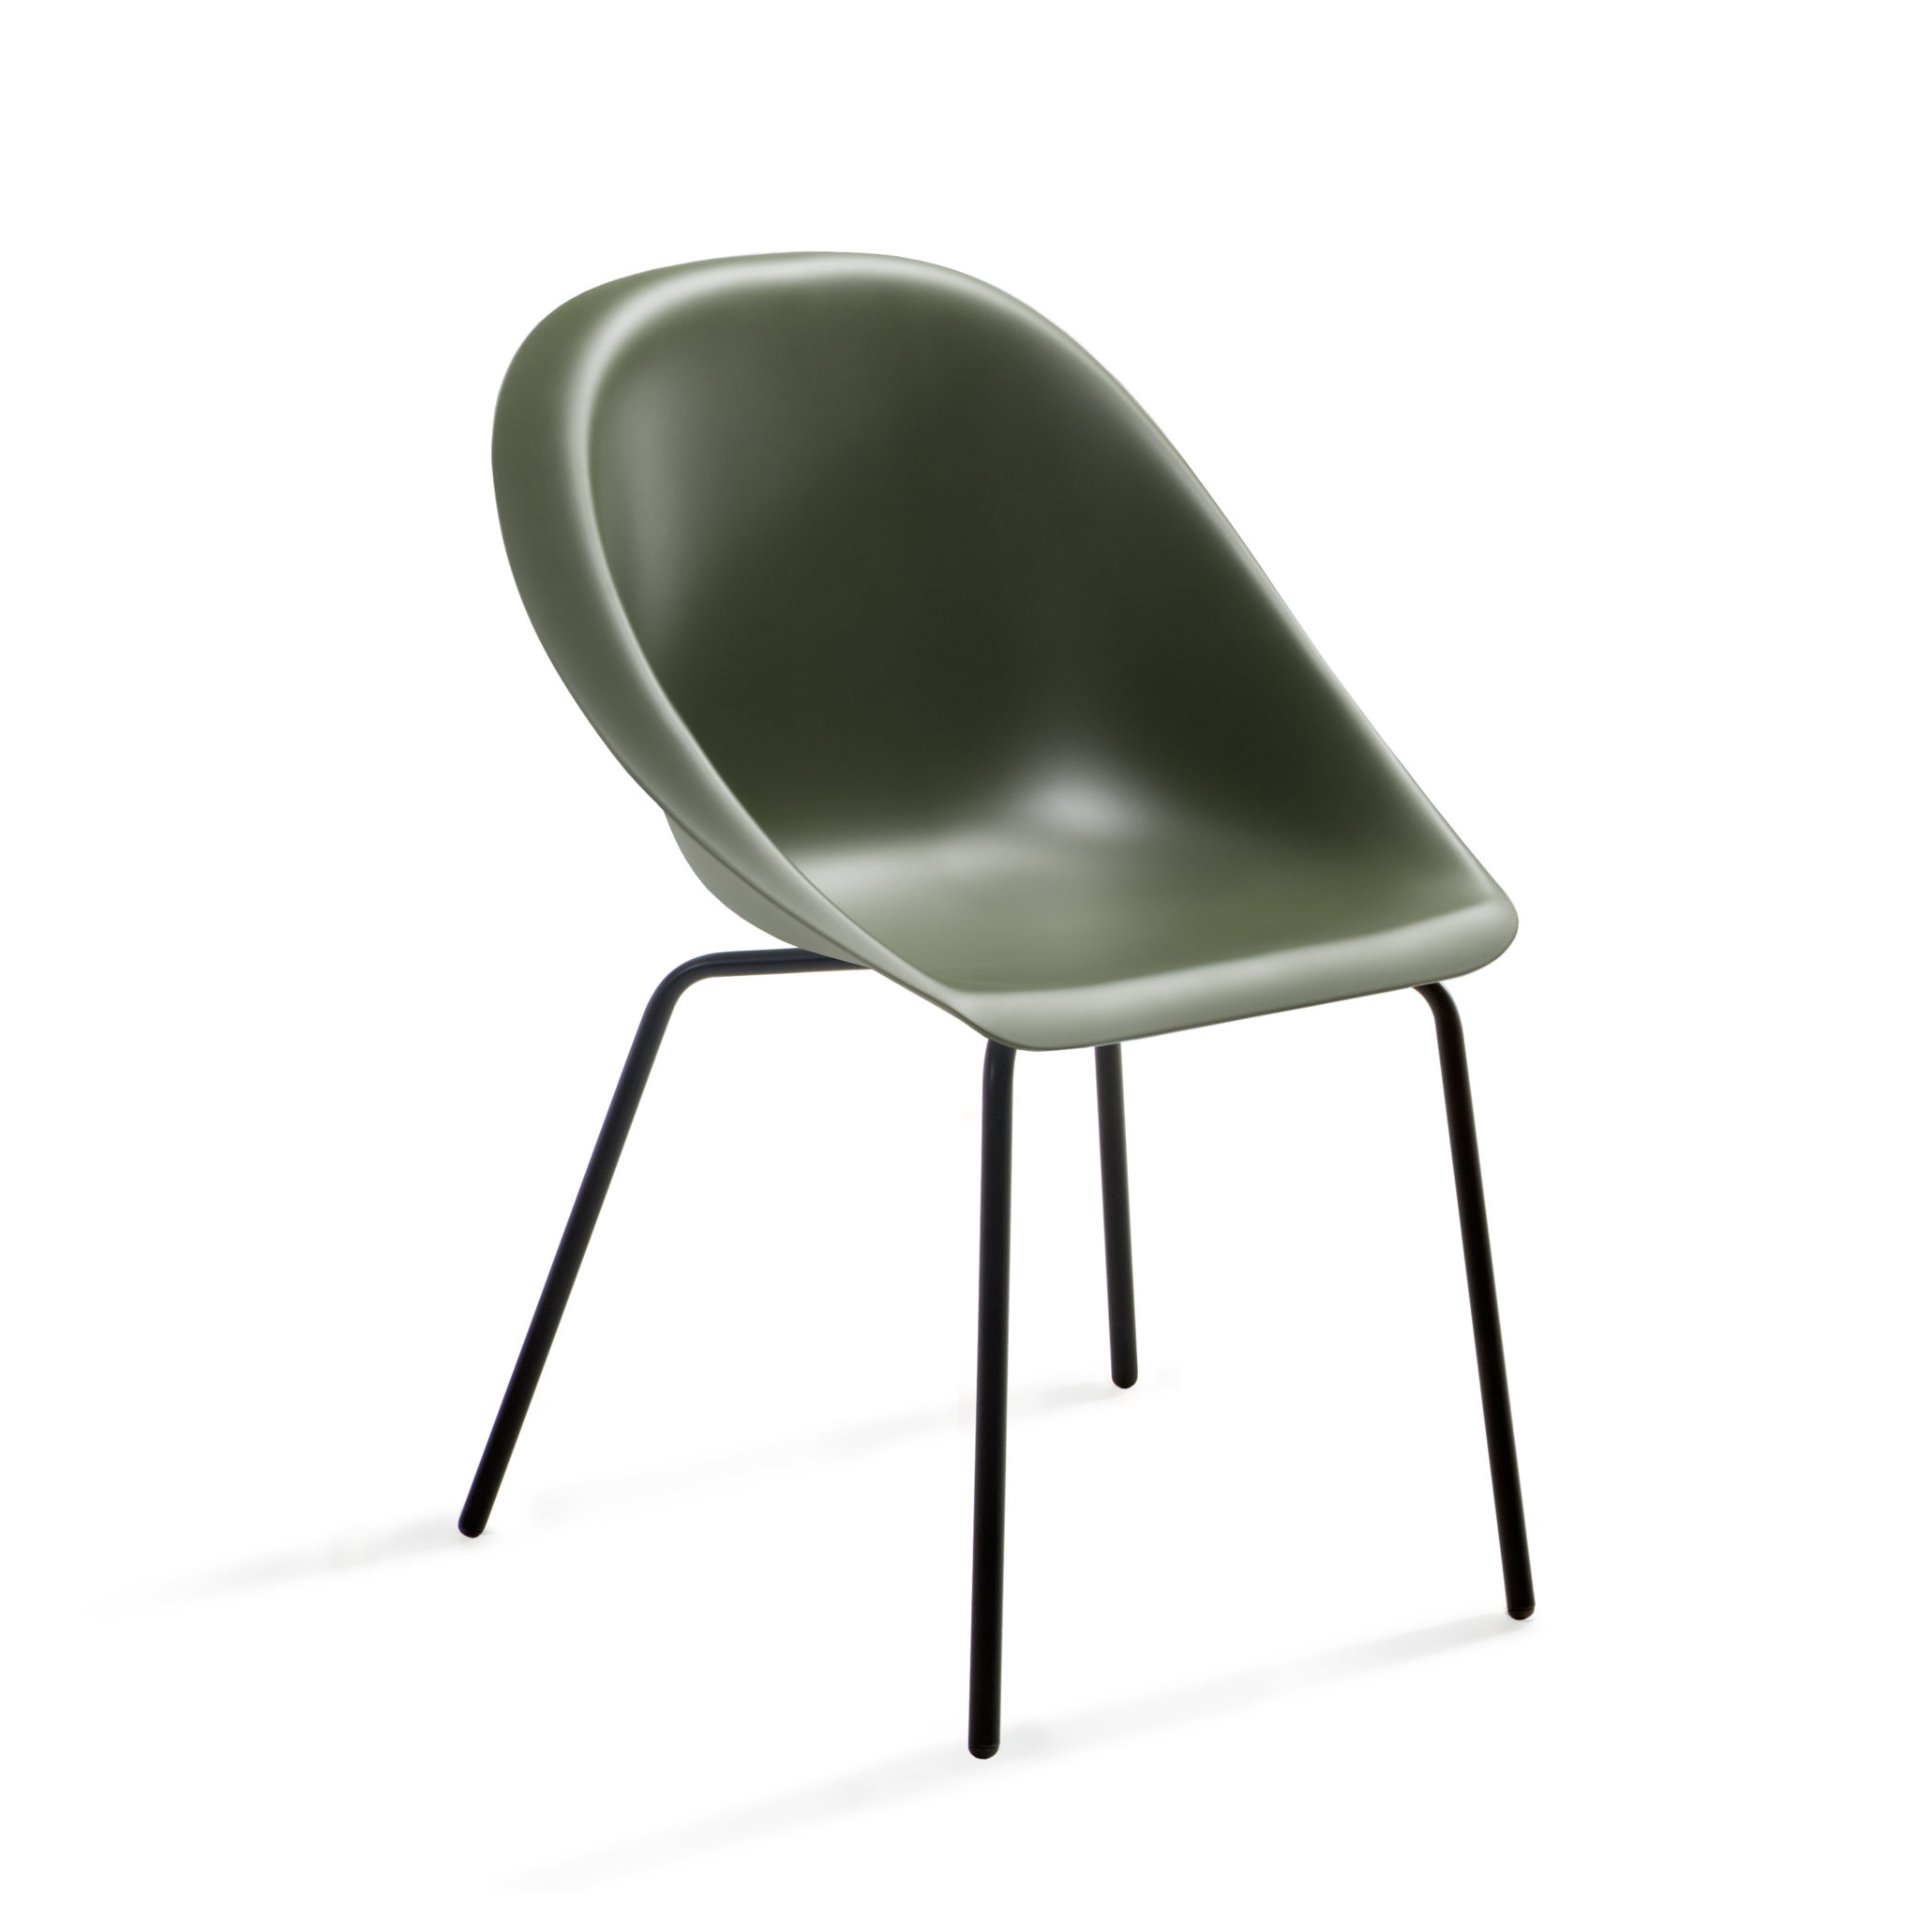 black structure - olive green seat